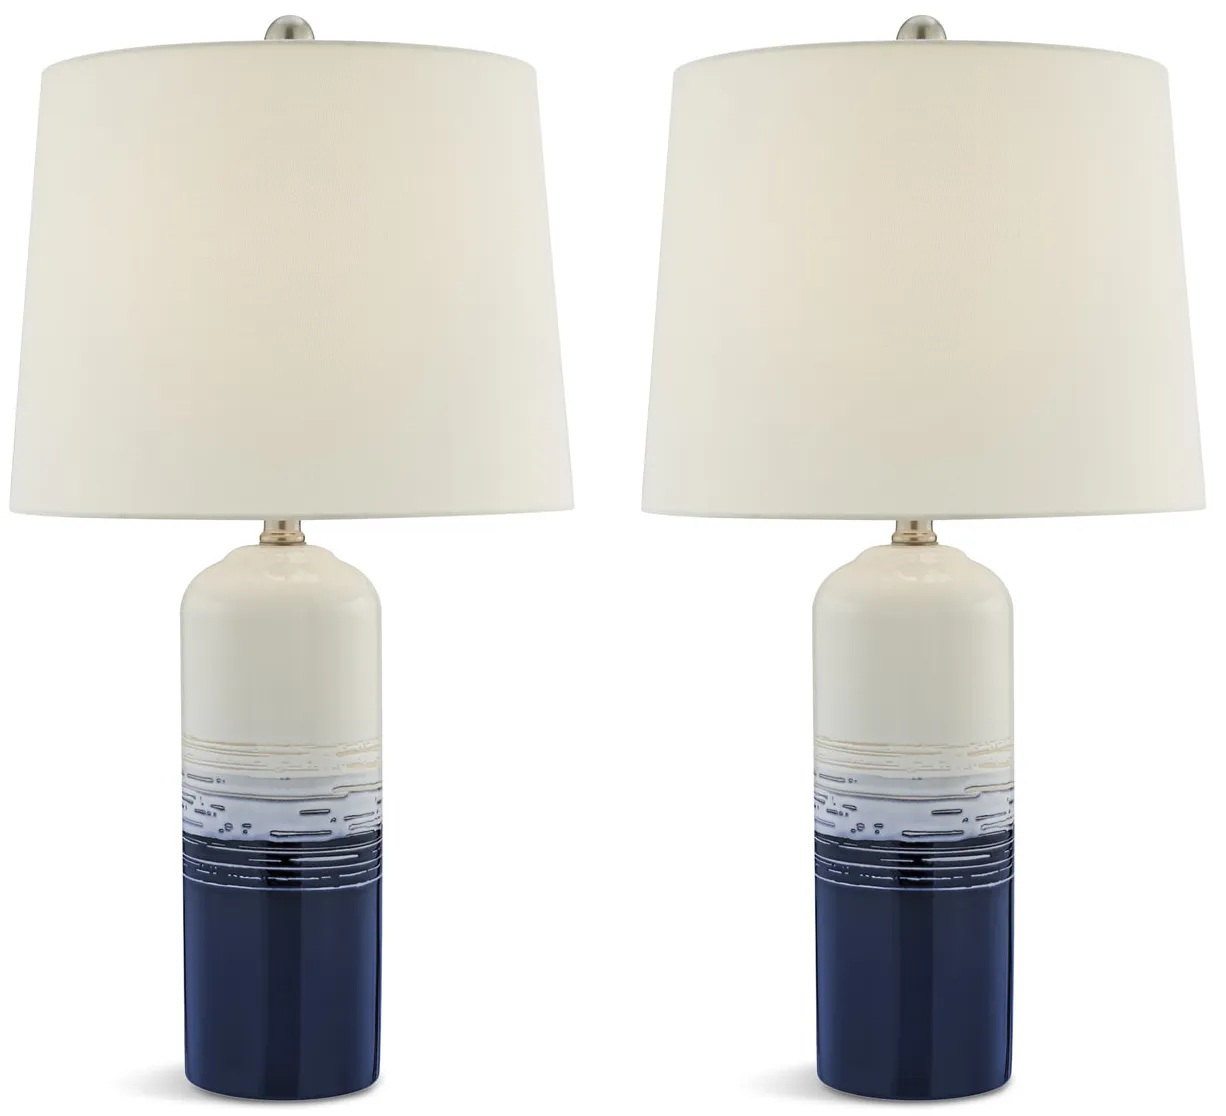 Heaton Table Lamp - Pack of 2